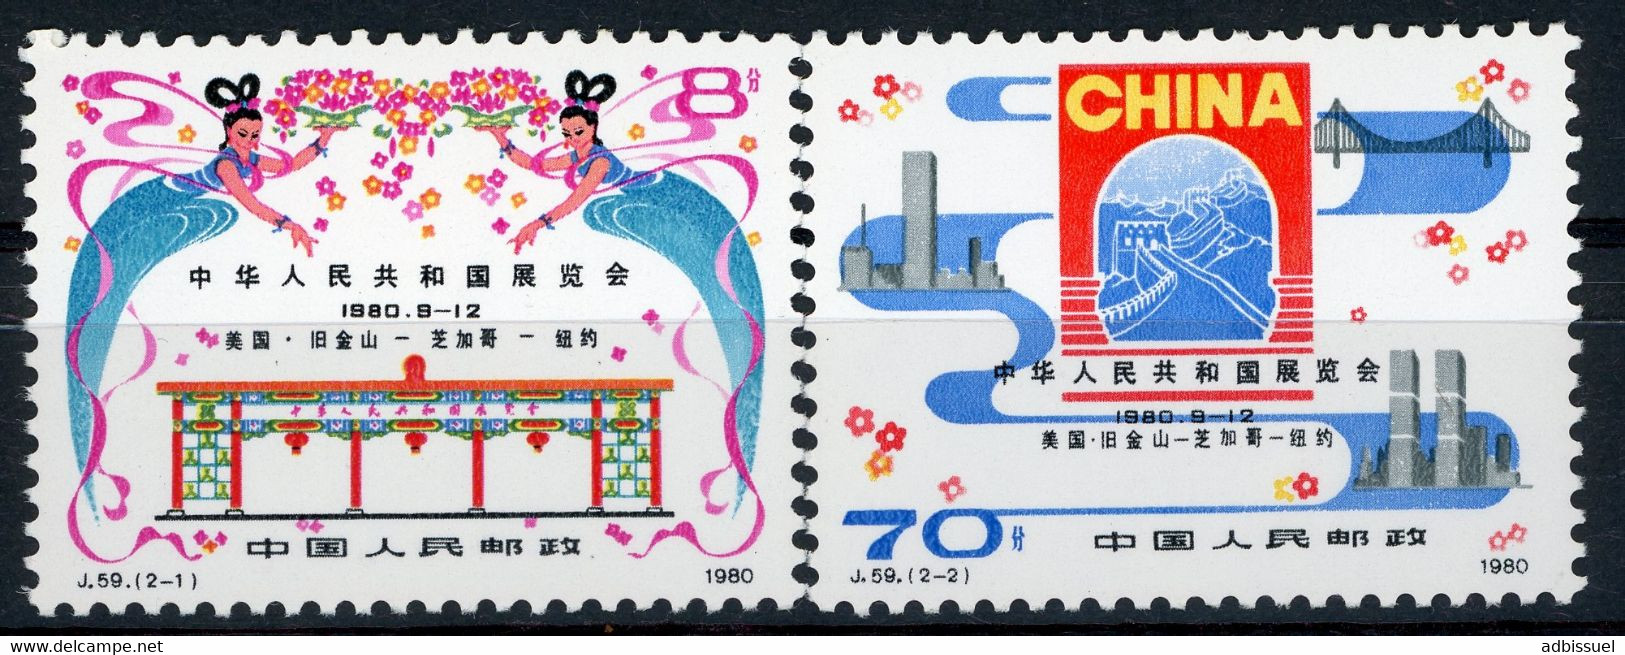 CHINA CHINE 1980 N° 2366 + 2367. Value (cote) 23 € MNH. VG/TB. Chinese Trade Show (Exposition Commerciale Chinoise) - Nuovi